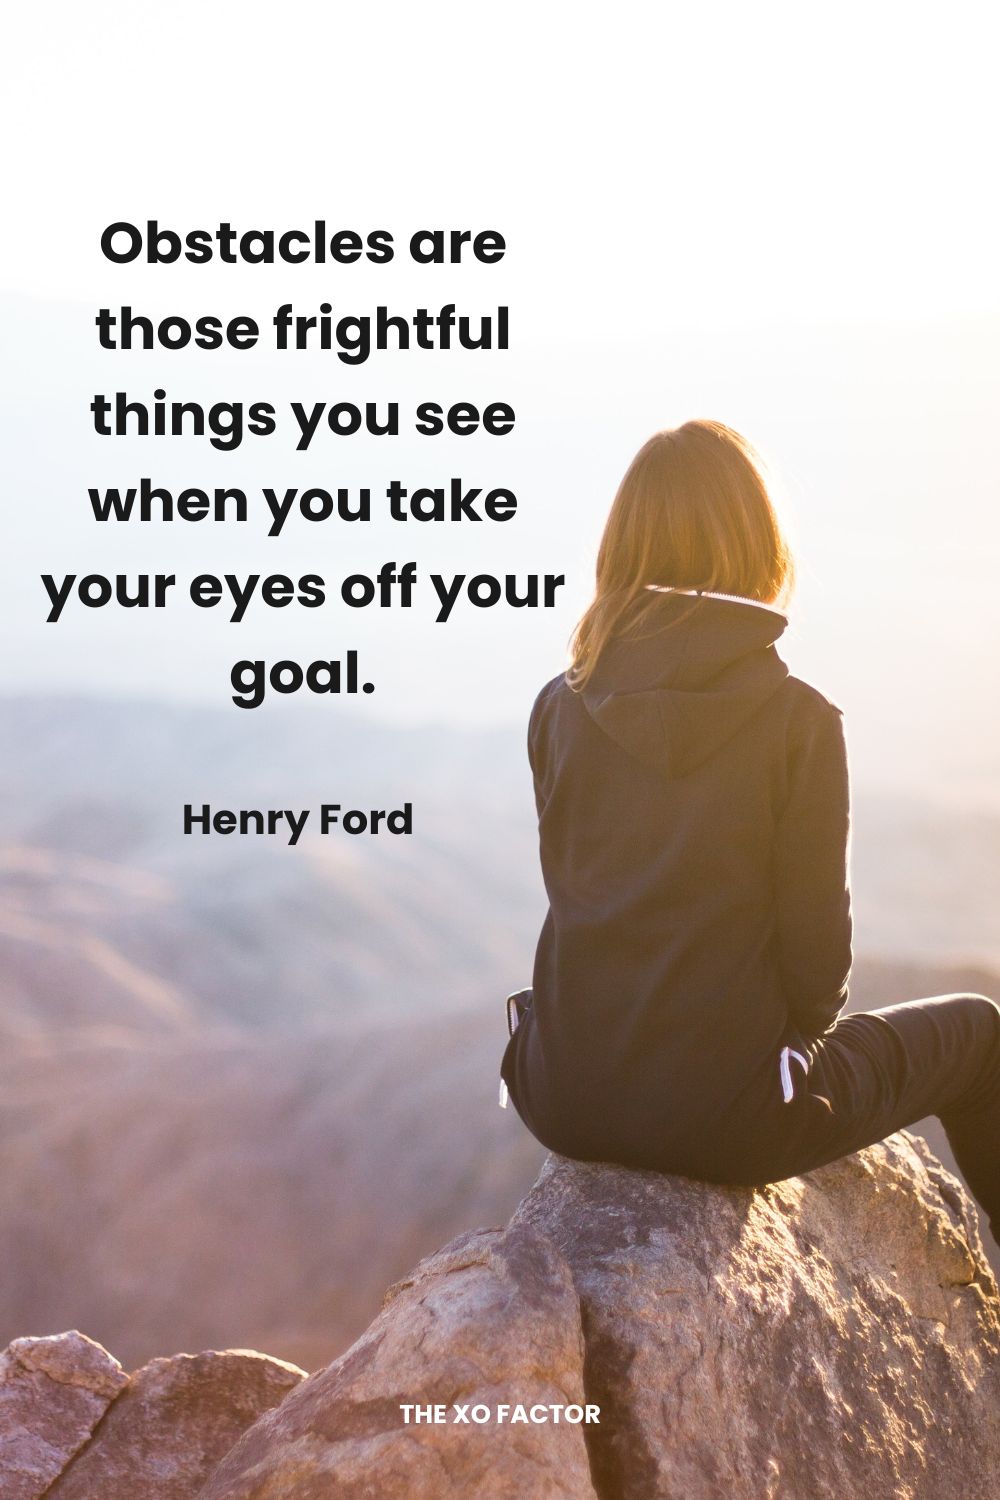 Obstacles are those frightful things you see when you take your eyes off your goal. Henry Ford